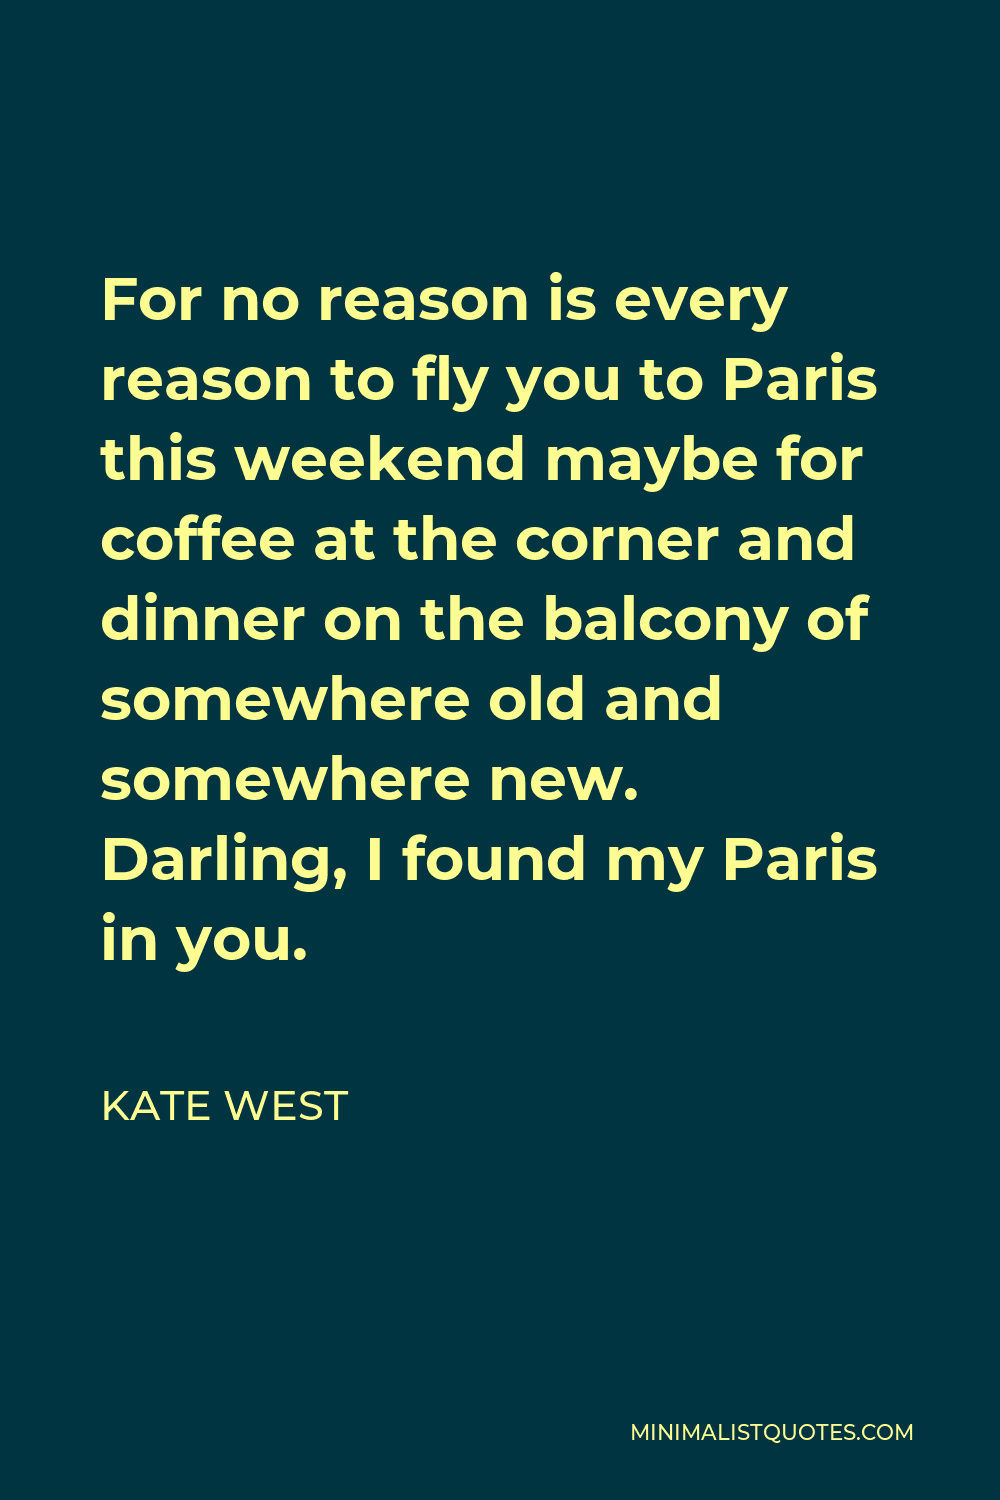 Kate West Quote - For no reason is every reason to fly you to Paris this weekend maybe for coffee at the corner and dinner on the balcony of somewhere old and somewhere new. Darling, I found my Paris in you.